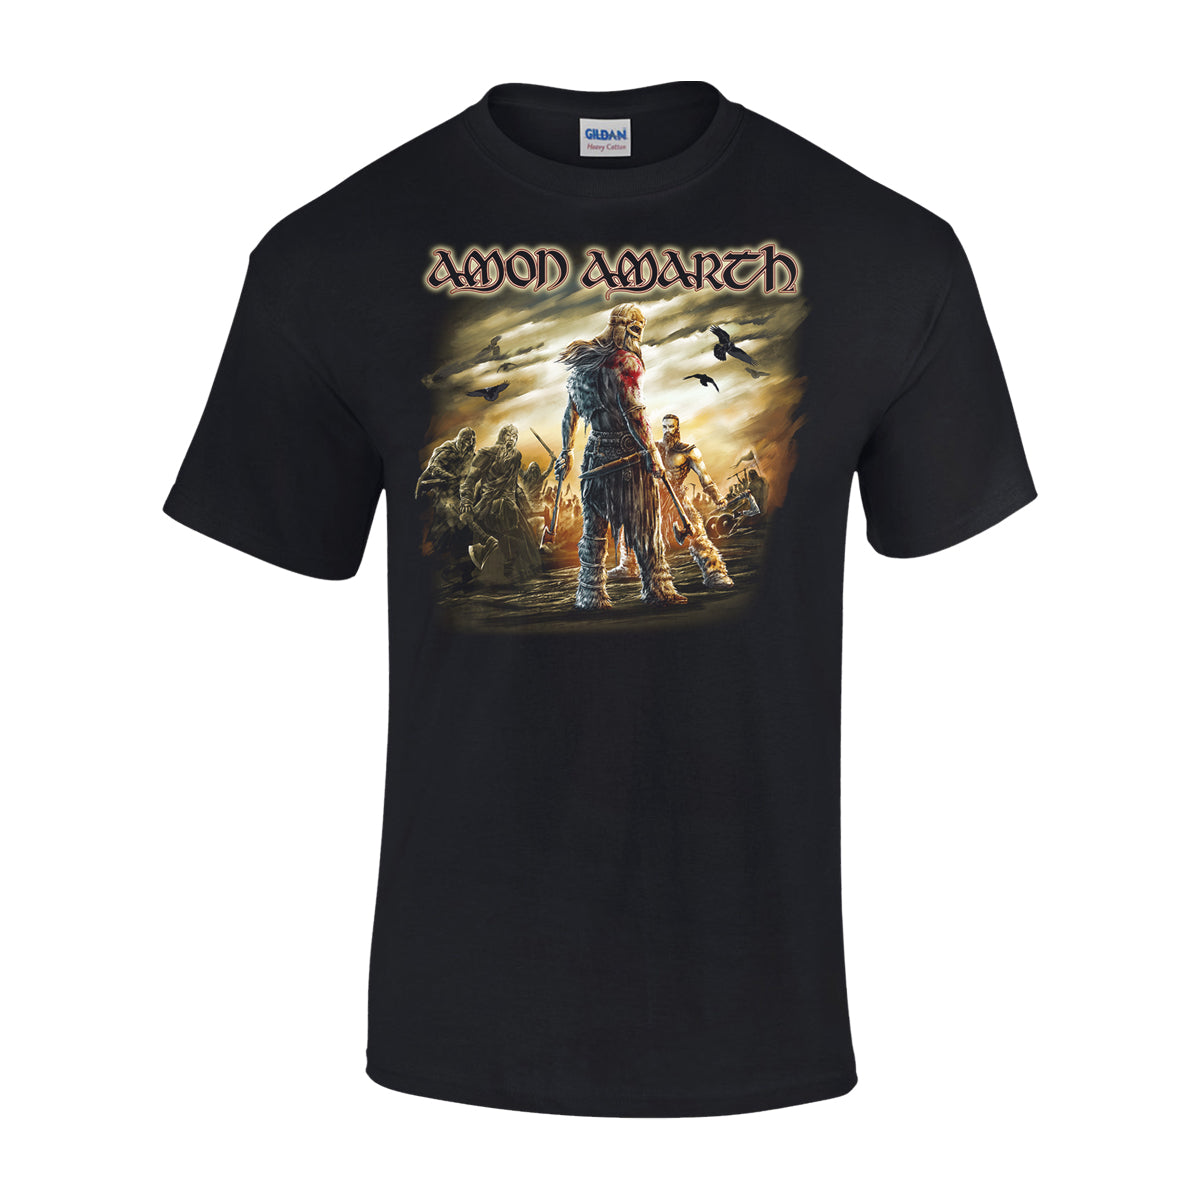 AMON AMARTH Get In The Ring T-Shirt